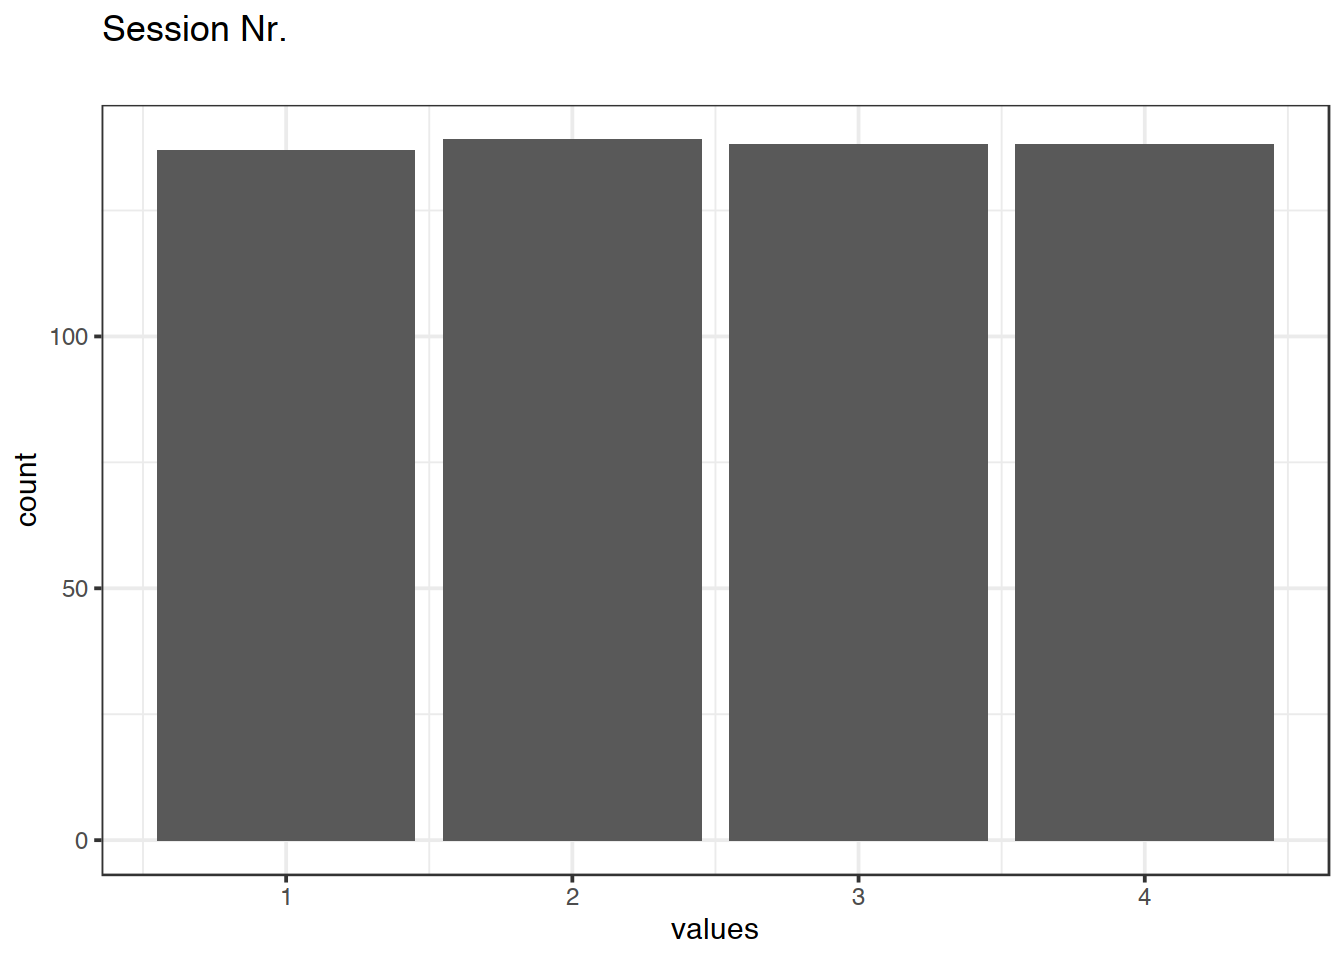 Distribution of values for Session Nr.